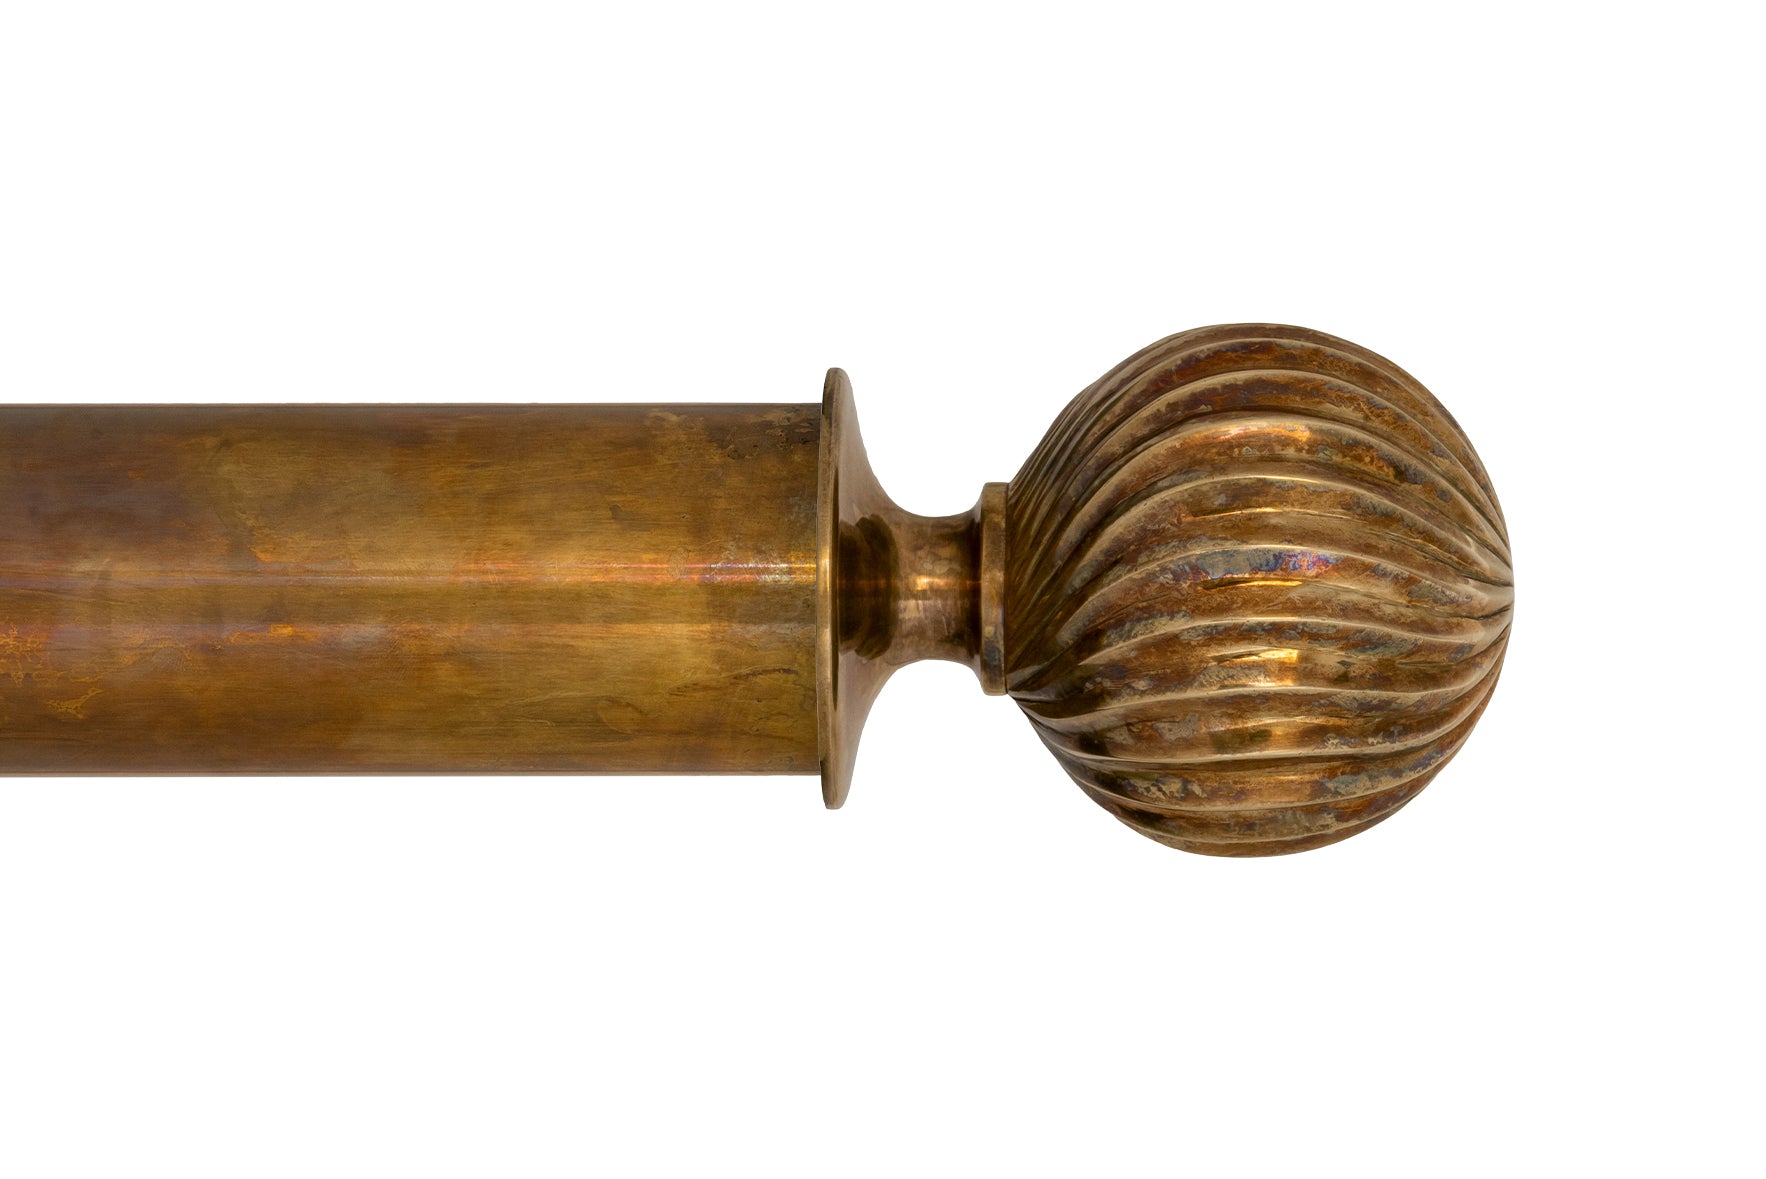 Tillys Twisted Ball Finial Curtain Pole Set in Old Brass